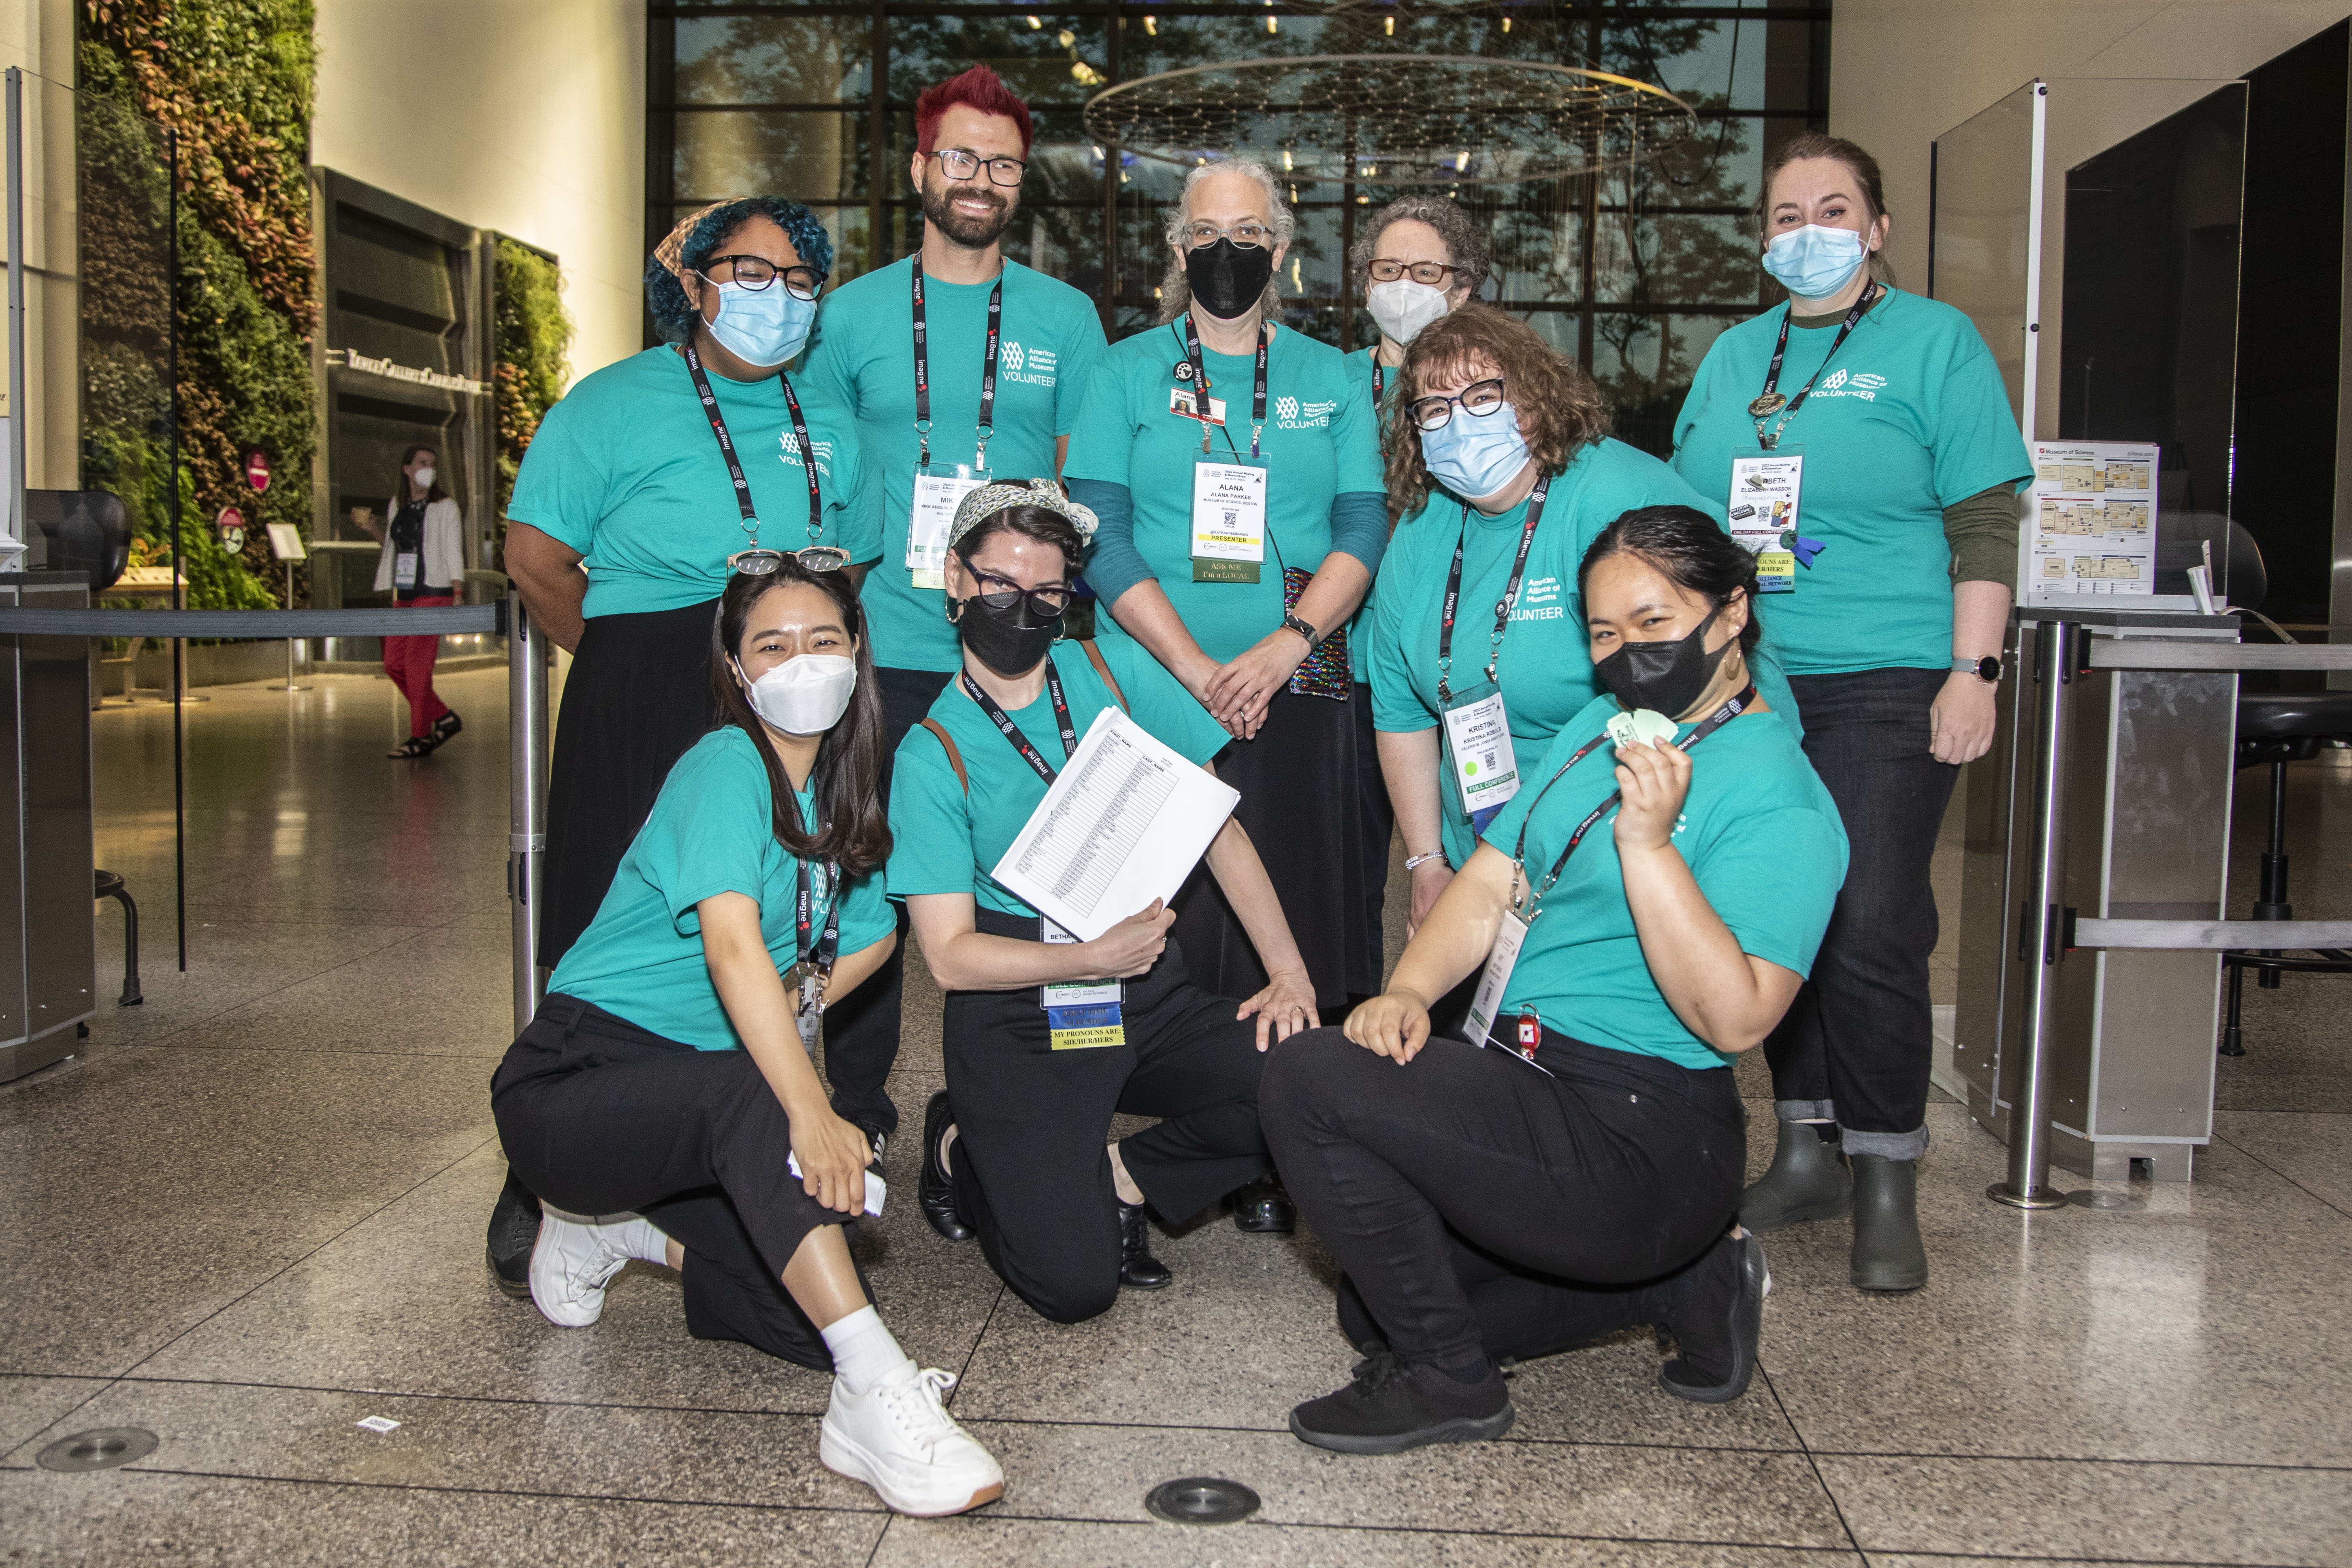 A group of volunteers smiling under face masks and posing for the camera